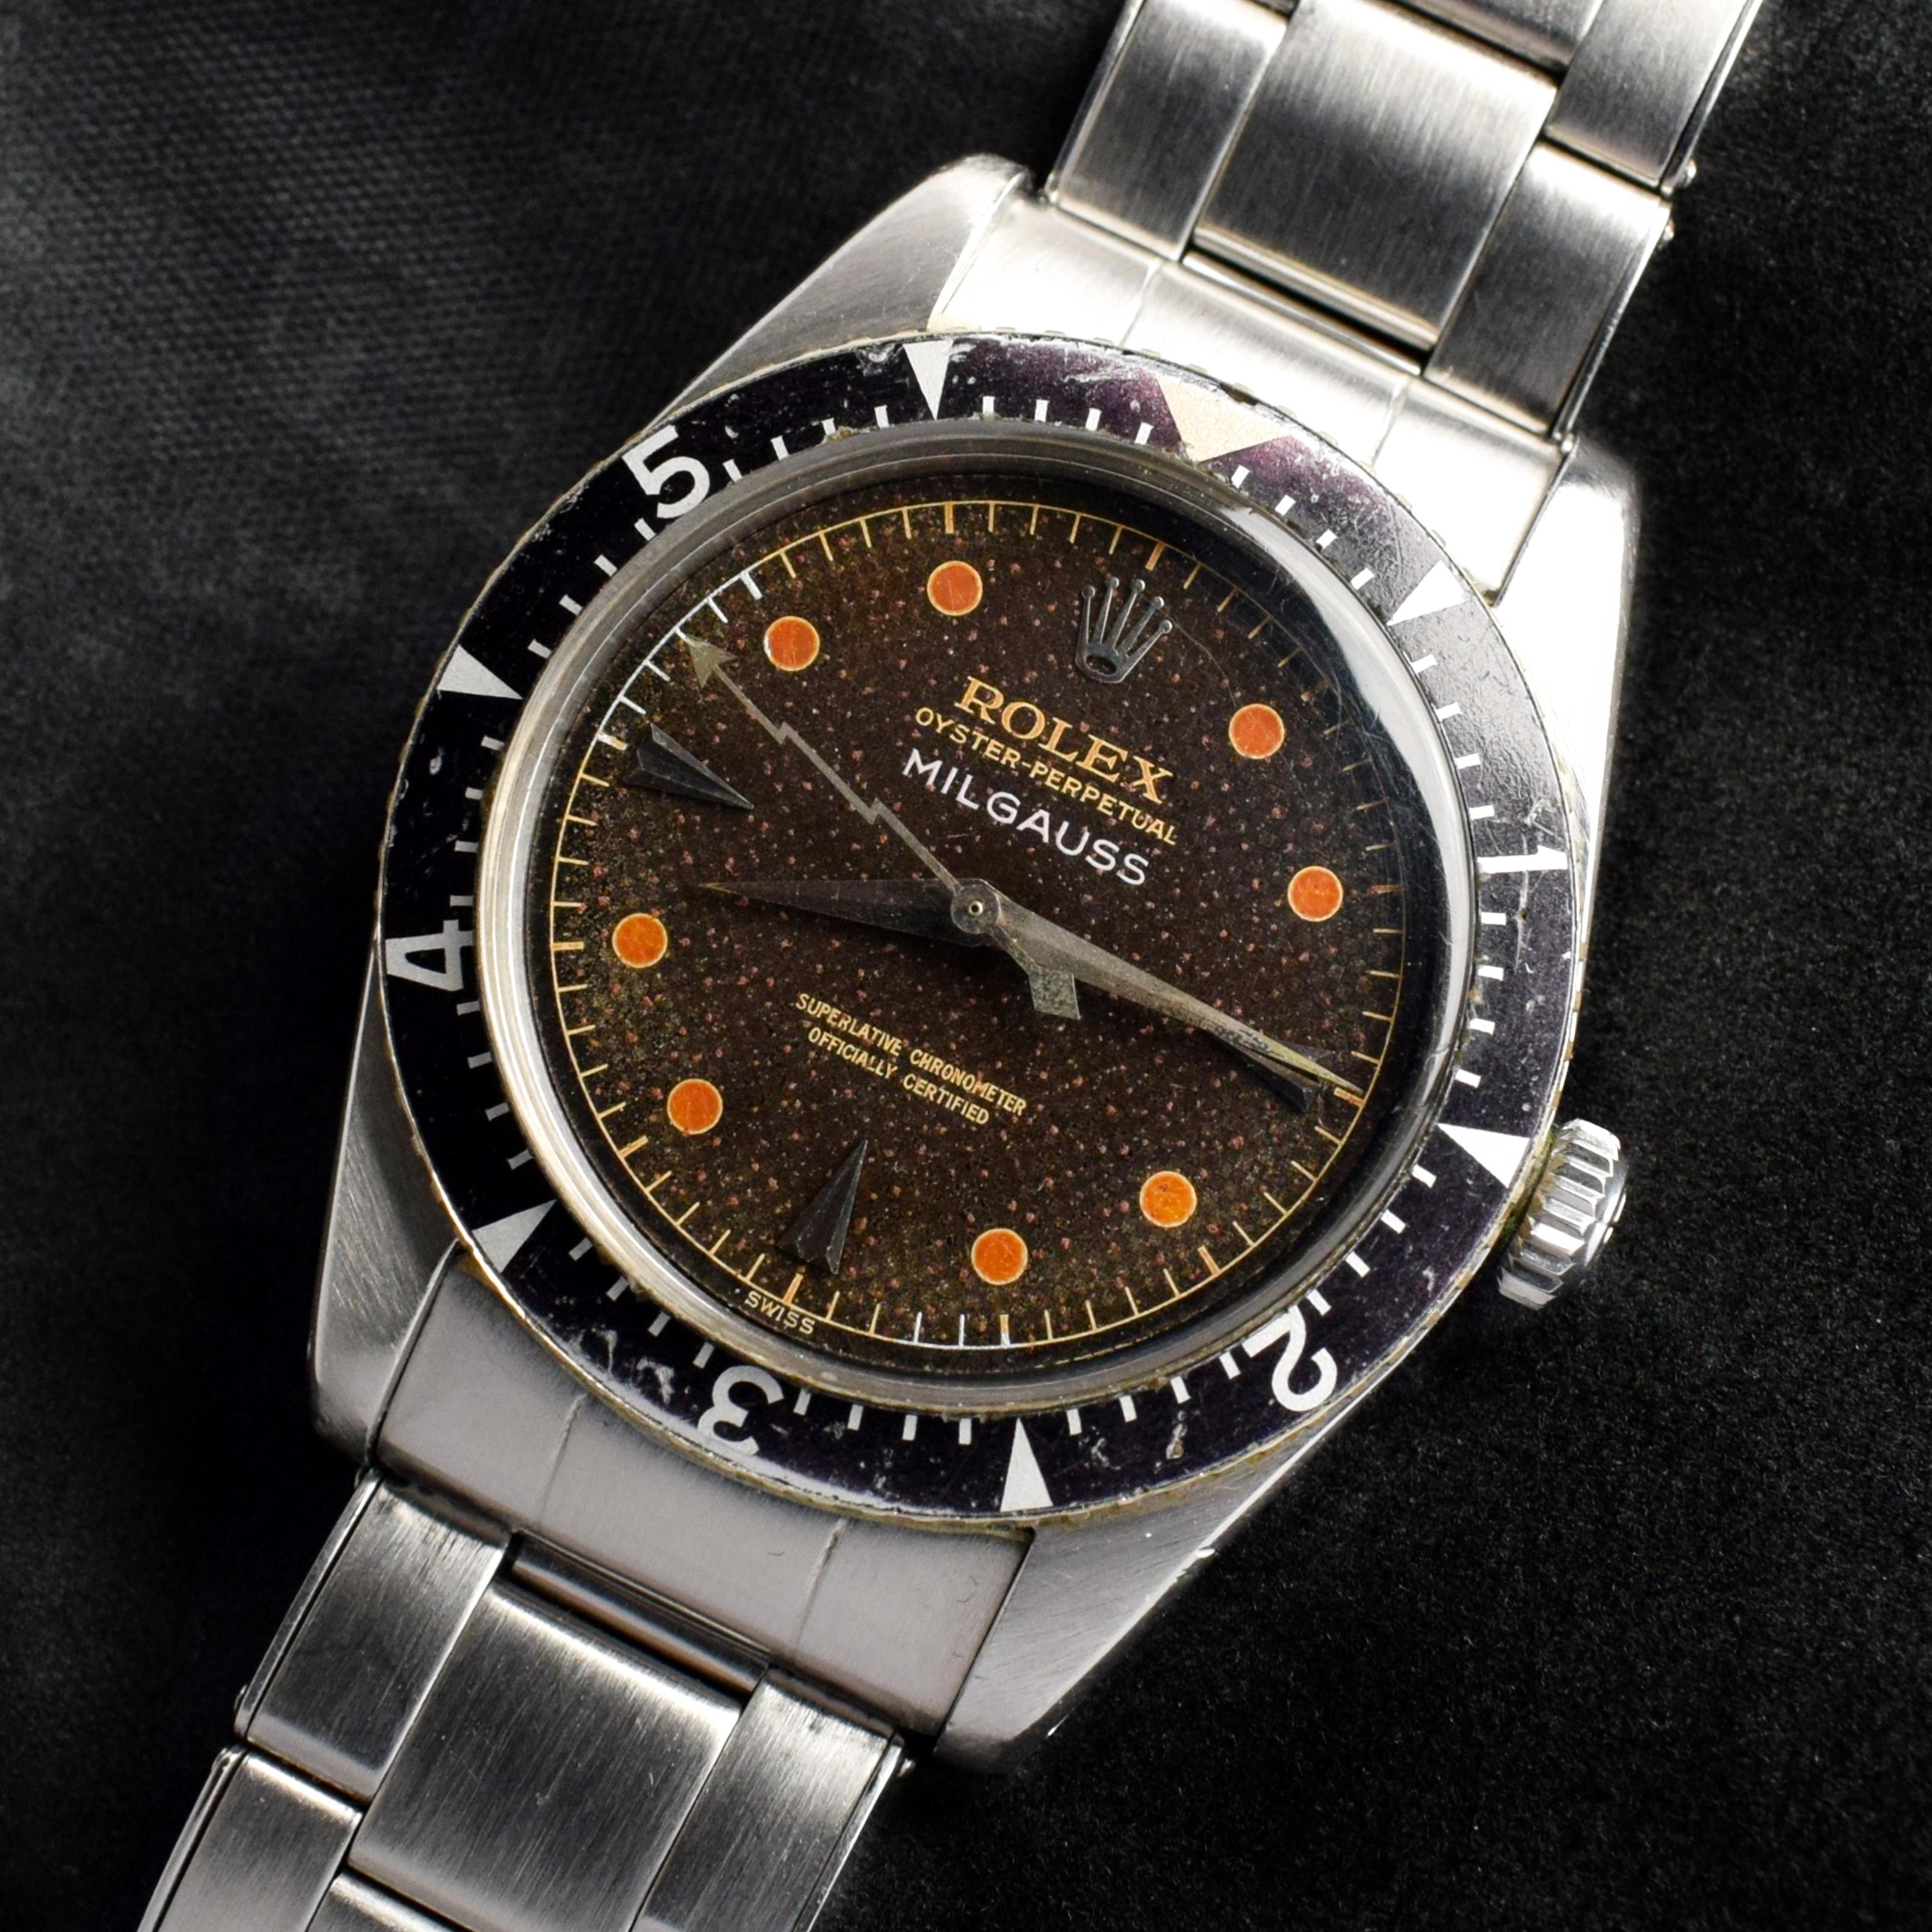 Brand: Vintage Rolex
Model: 6541
Year: 1958
Serial number: 41xxxx
Reference: OT1060

Case: Show sign of wear with some polishing from previous and inner case back stamped IV 1958; the outer case back has engraved the name “Charles Sheffield”

Dial: